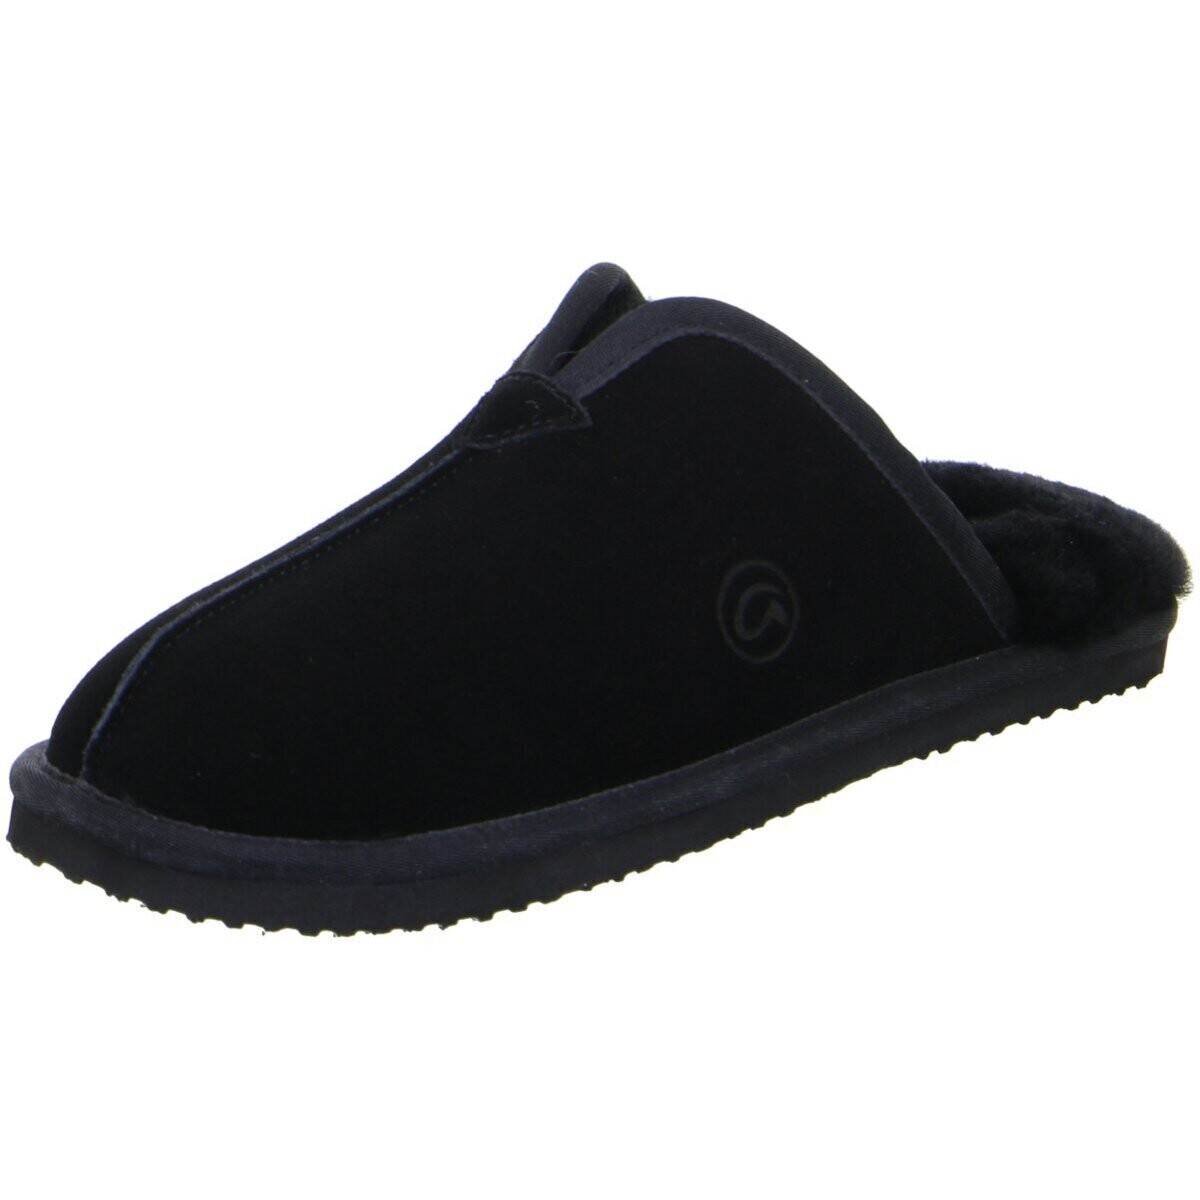 Chaussures Homme Chaussons Ara  Noir